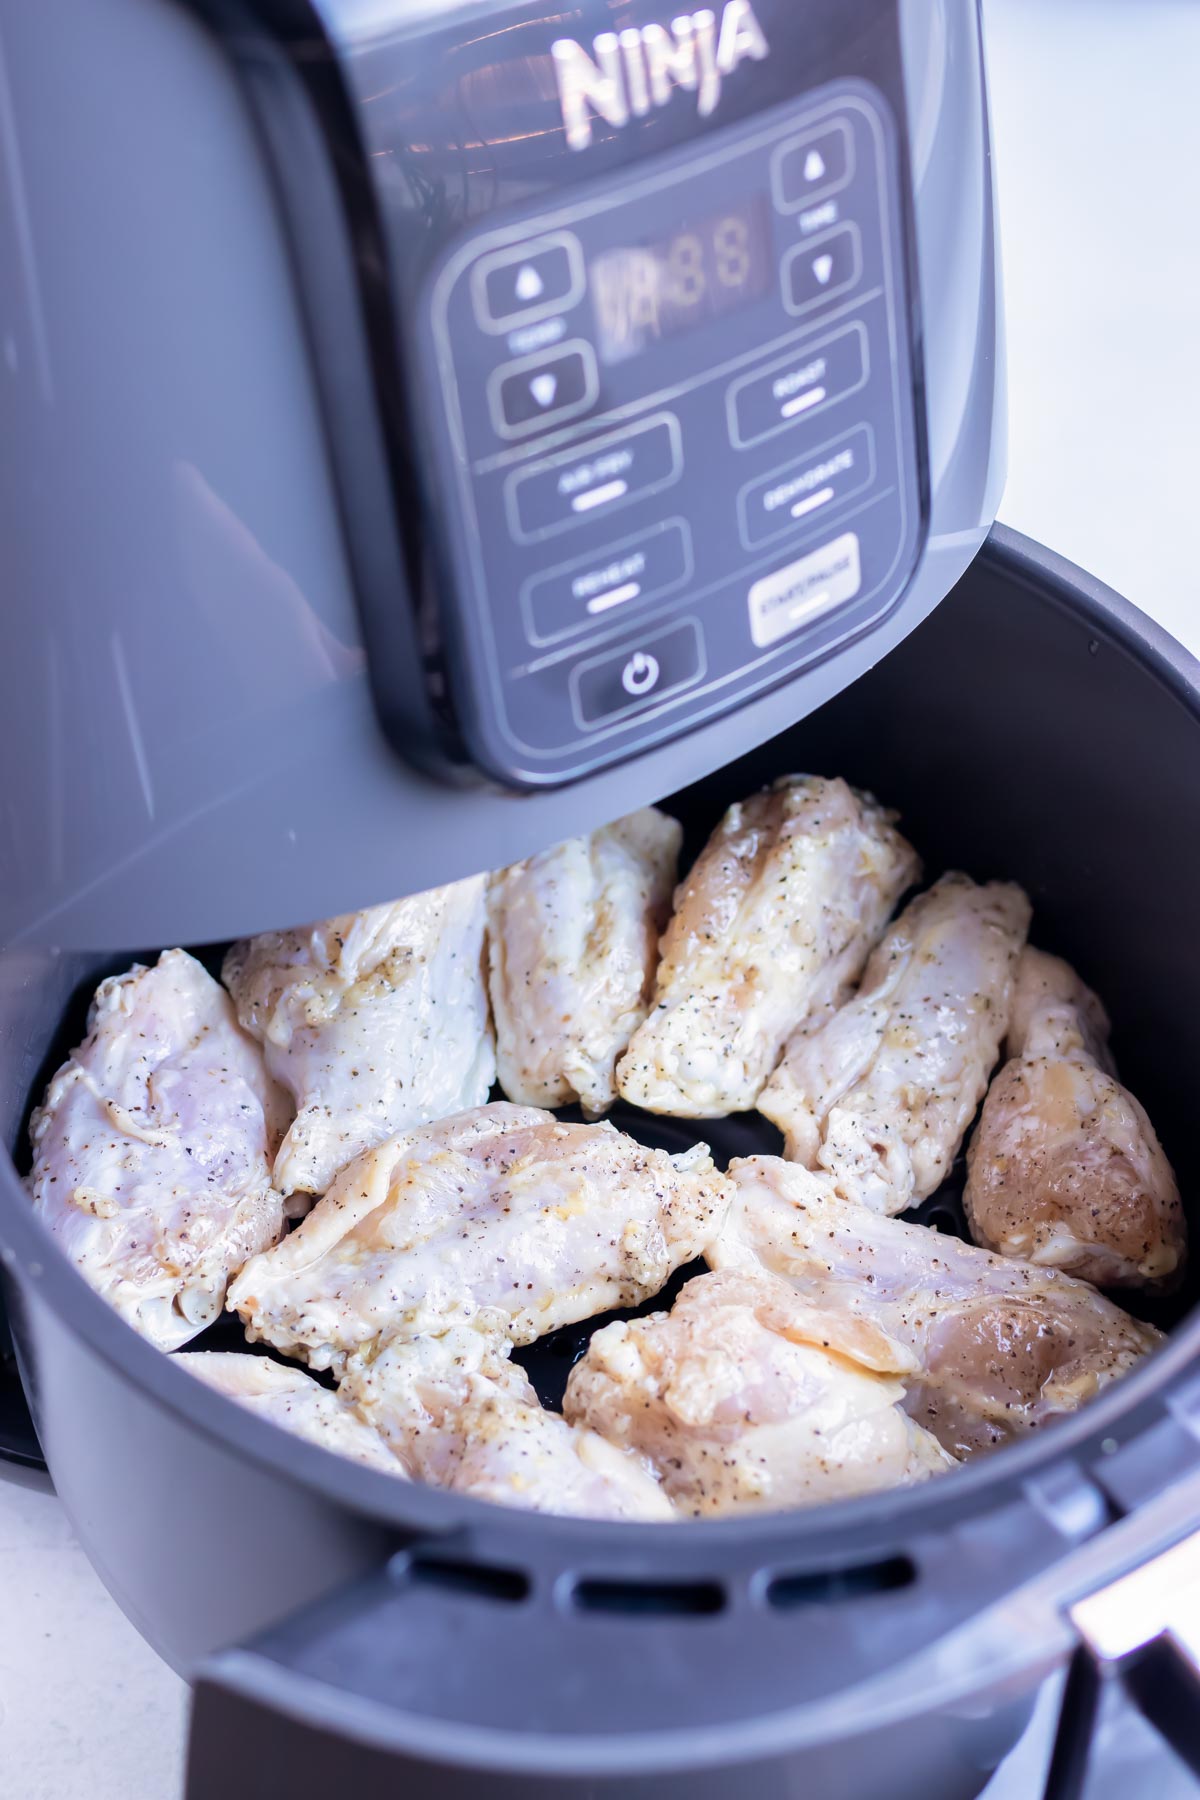 Raw chicken wings are placed in a single layer in the air fryer basket.